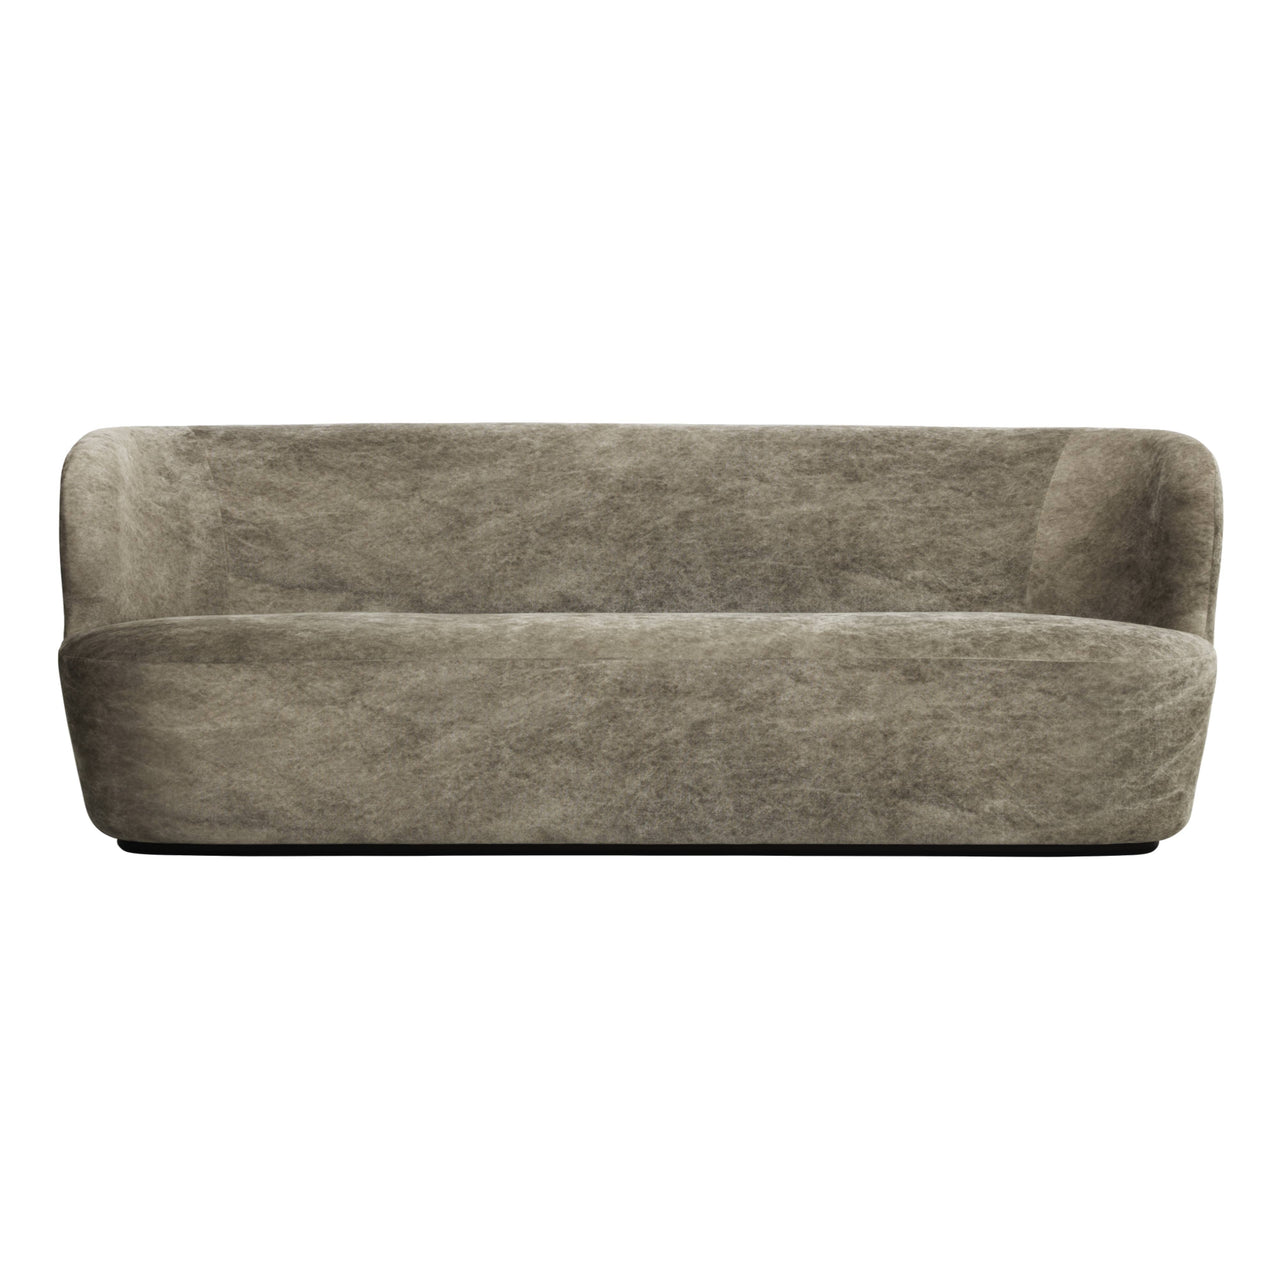 Stay Sofa: Solid Base